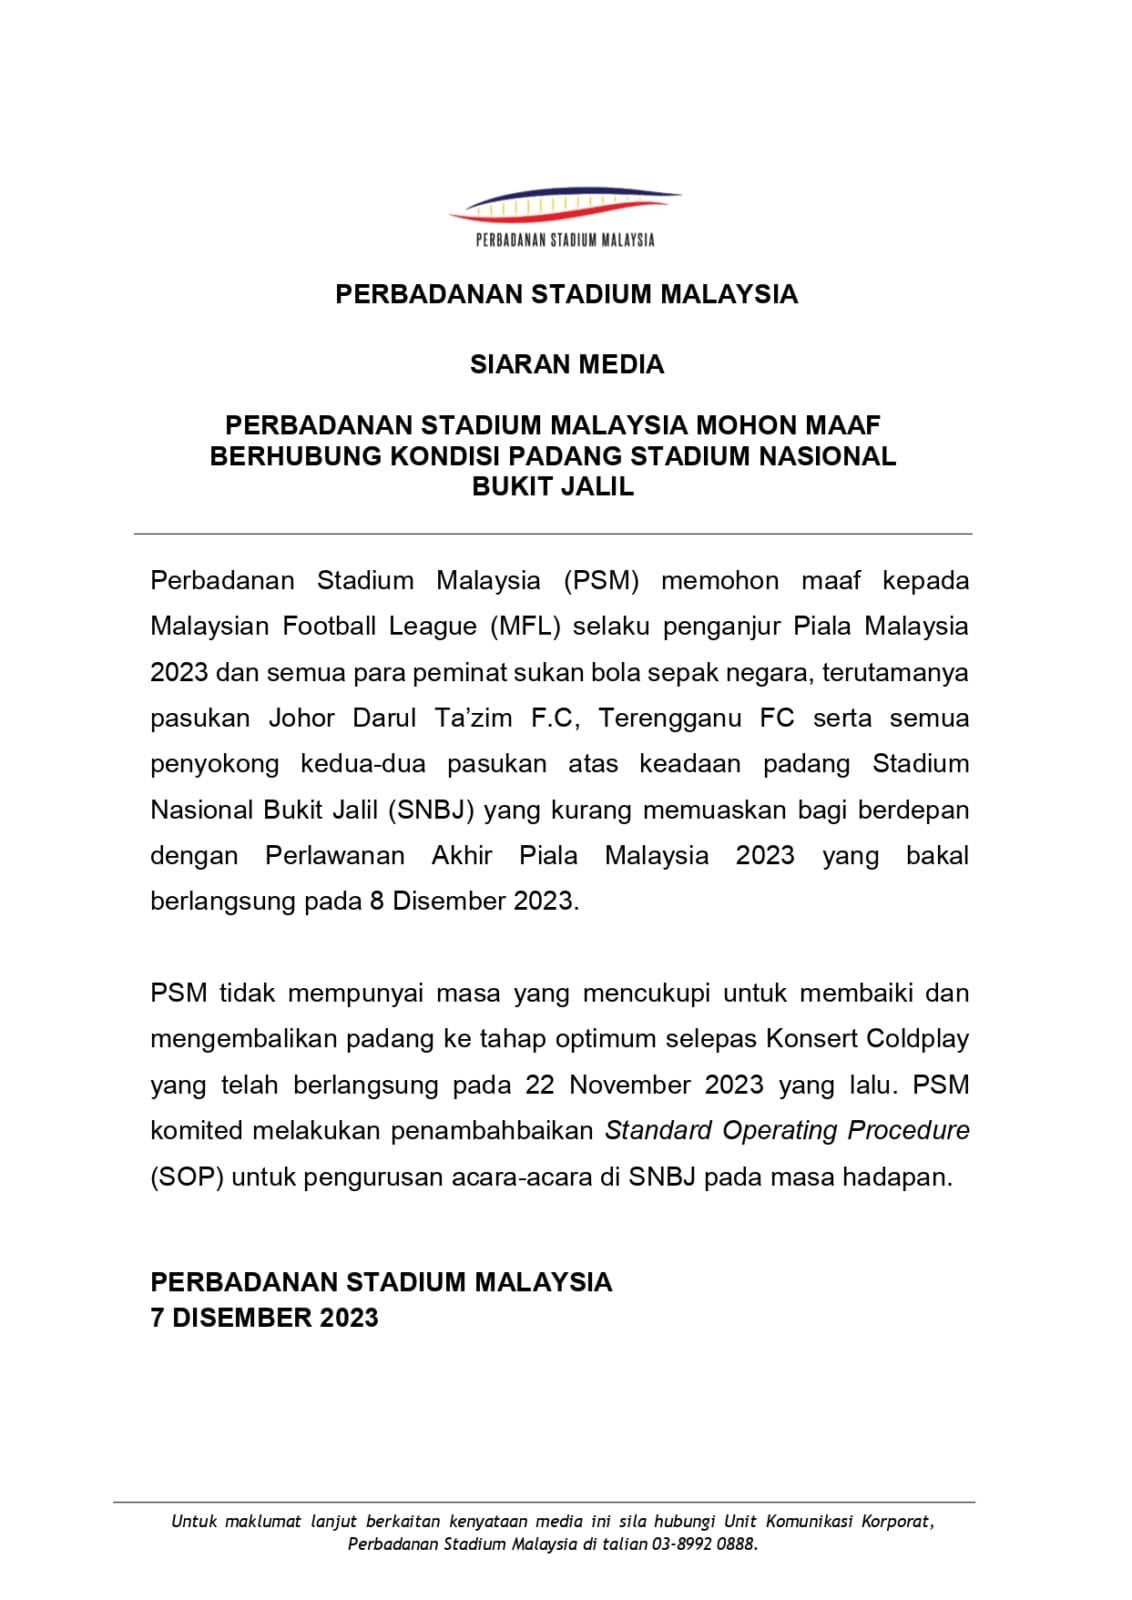 PSM apologize for stadium nasional bukit jalil field condition